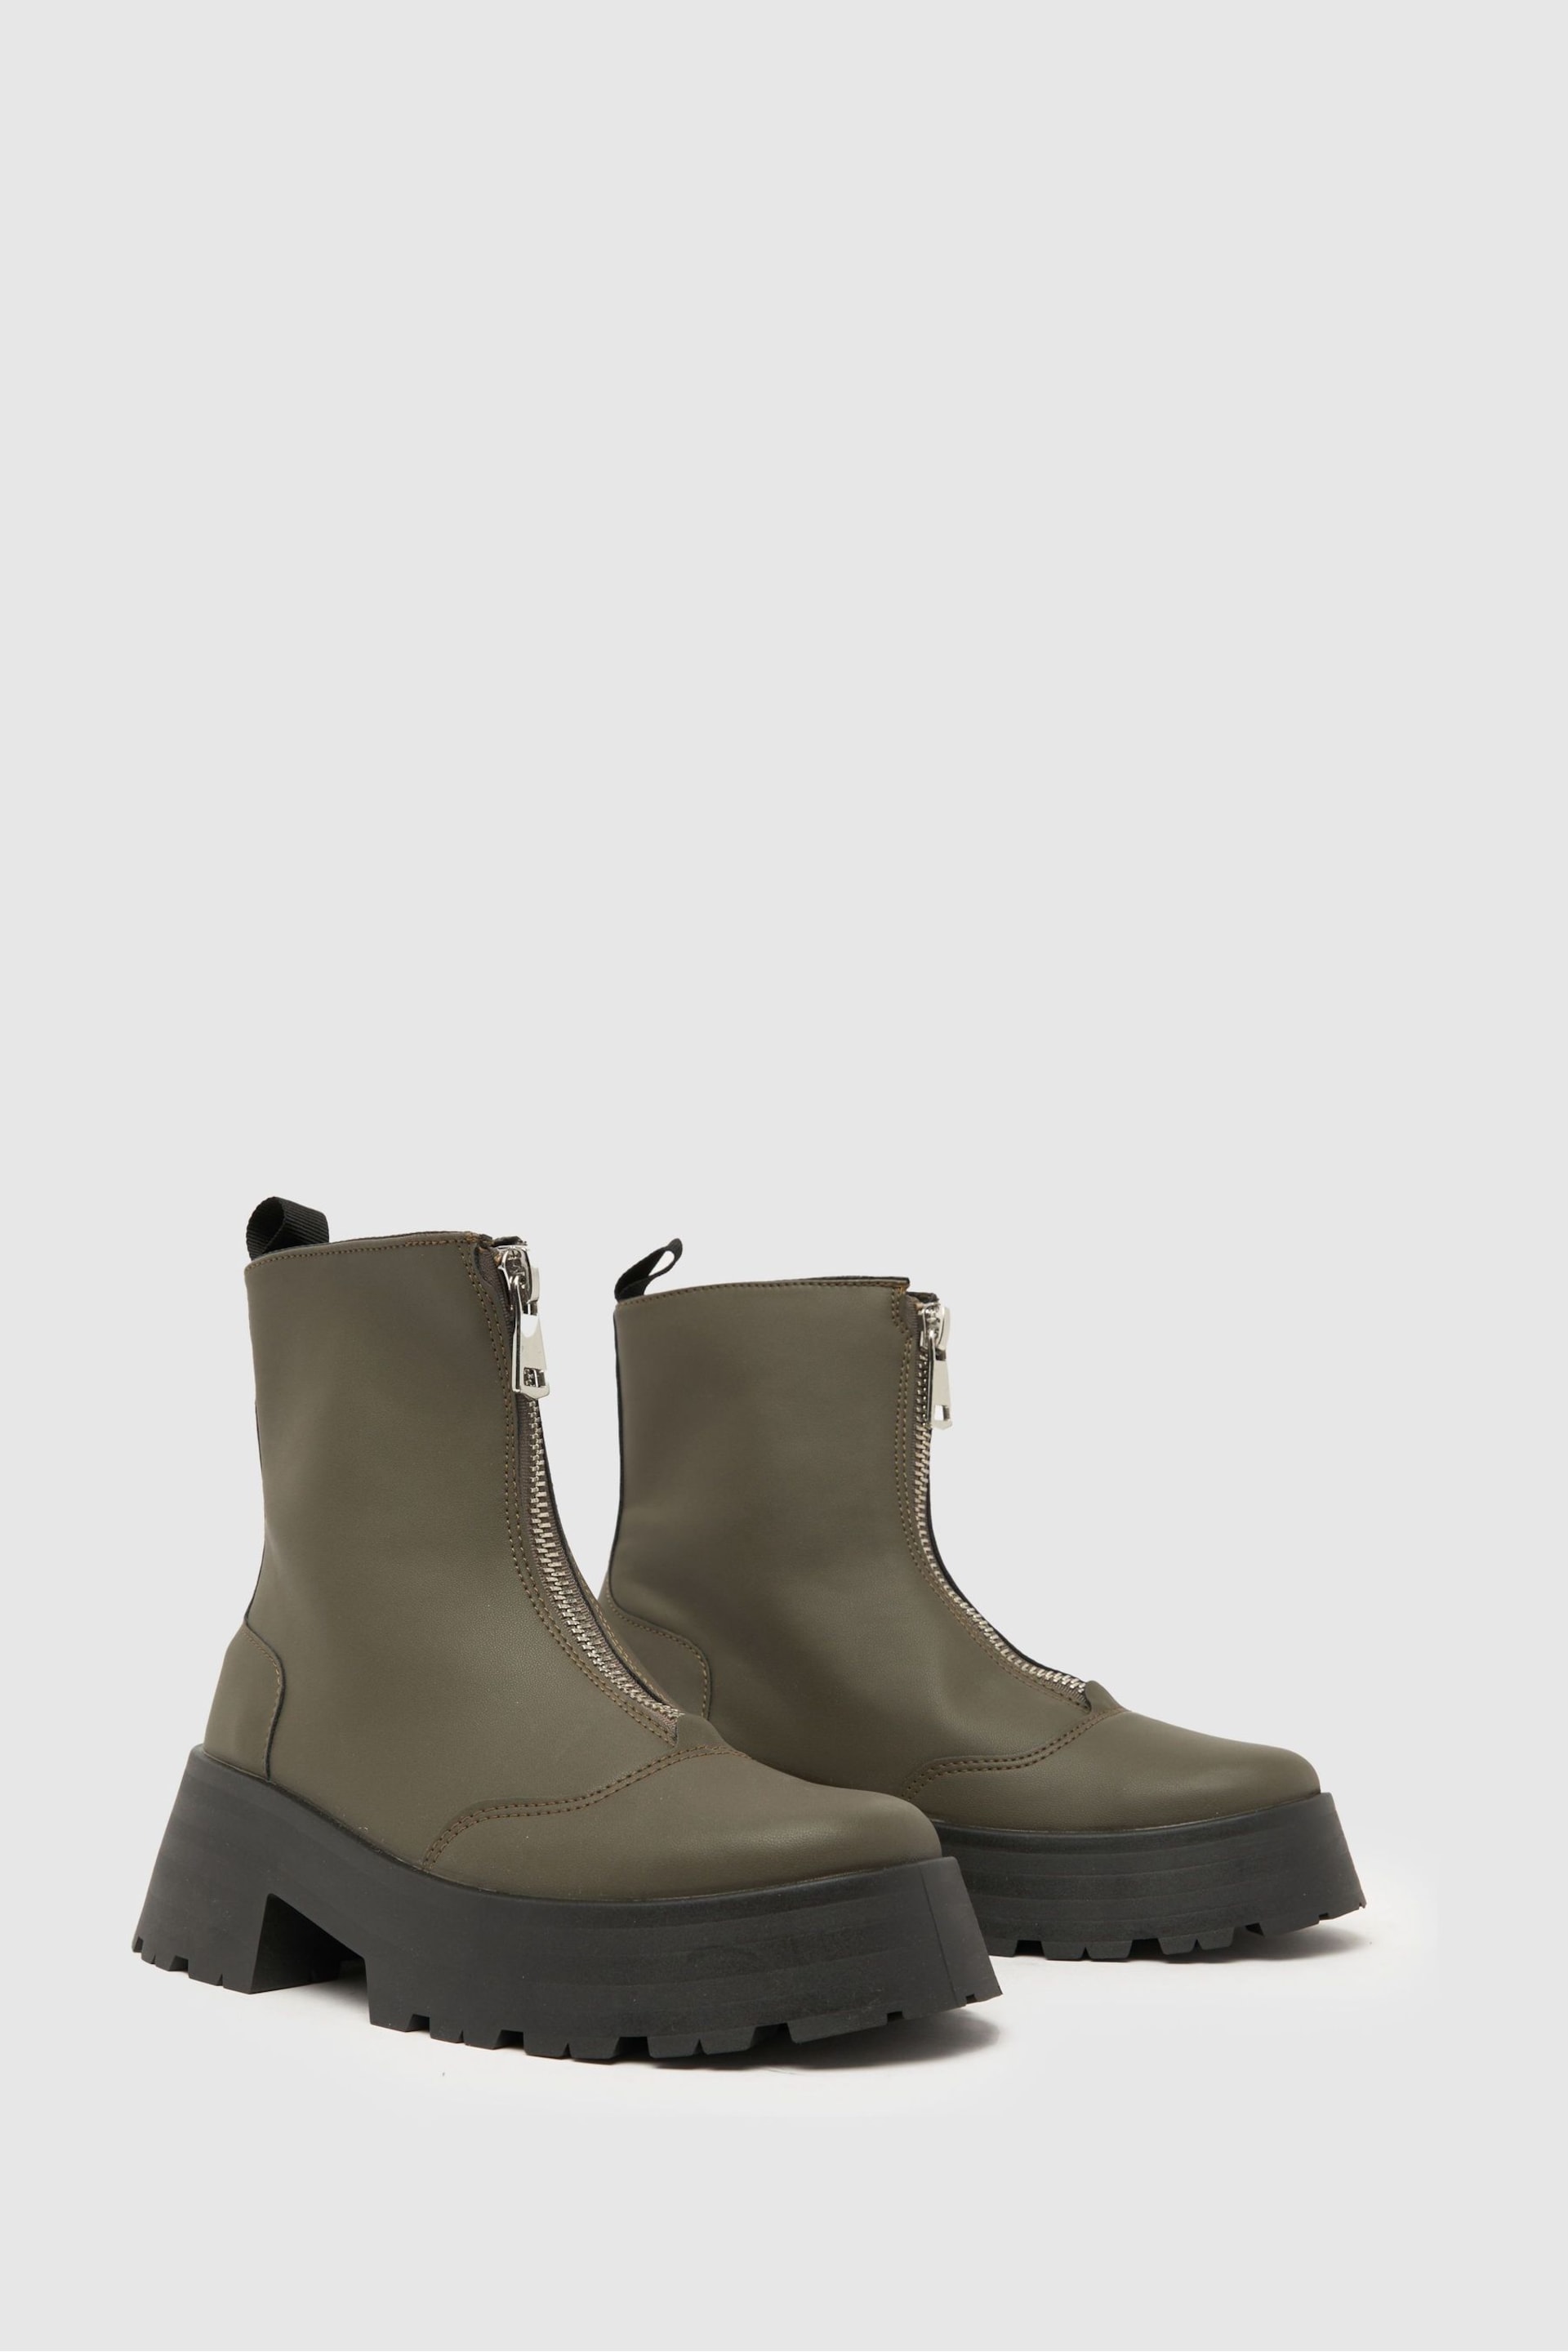 Schuh Arnold Chunky Zip Front Boots - Image 2 of 4